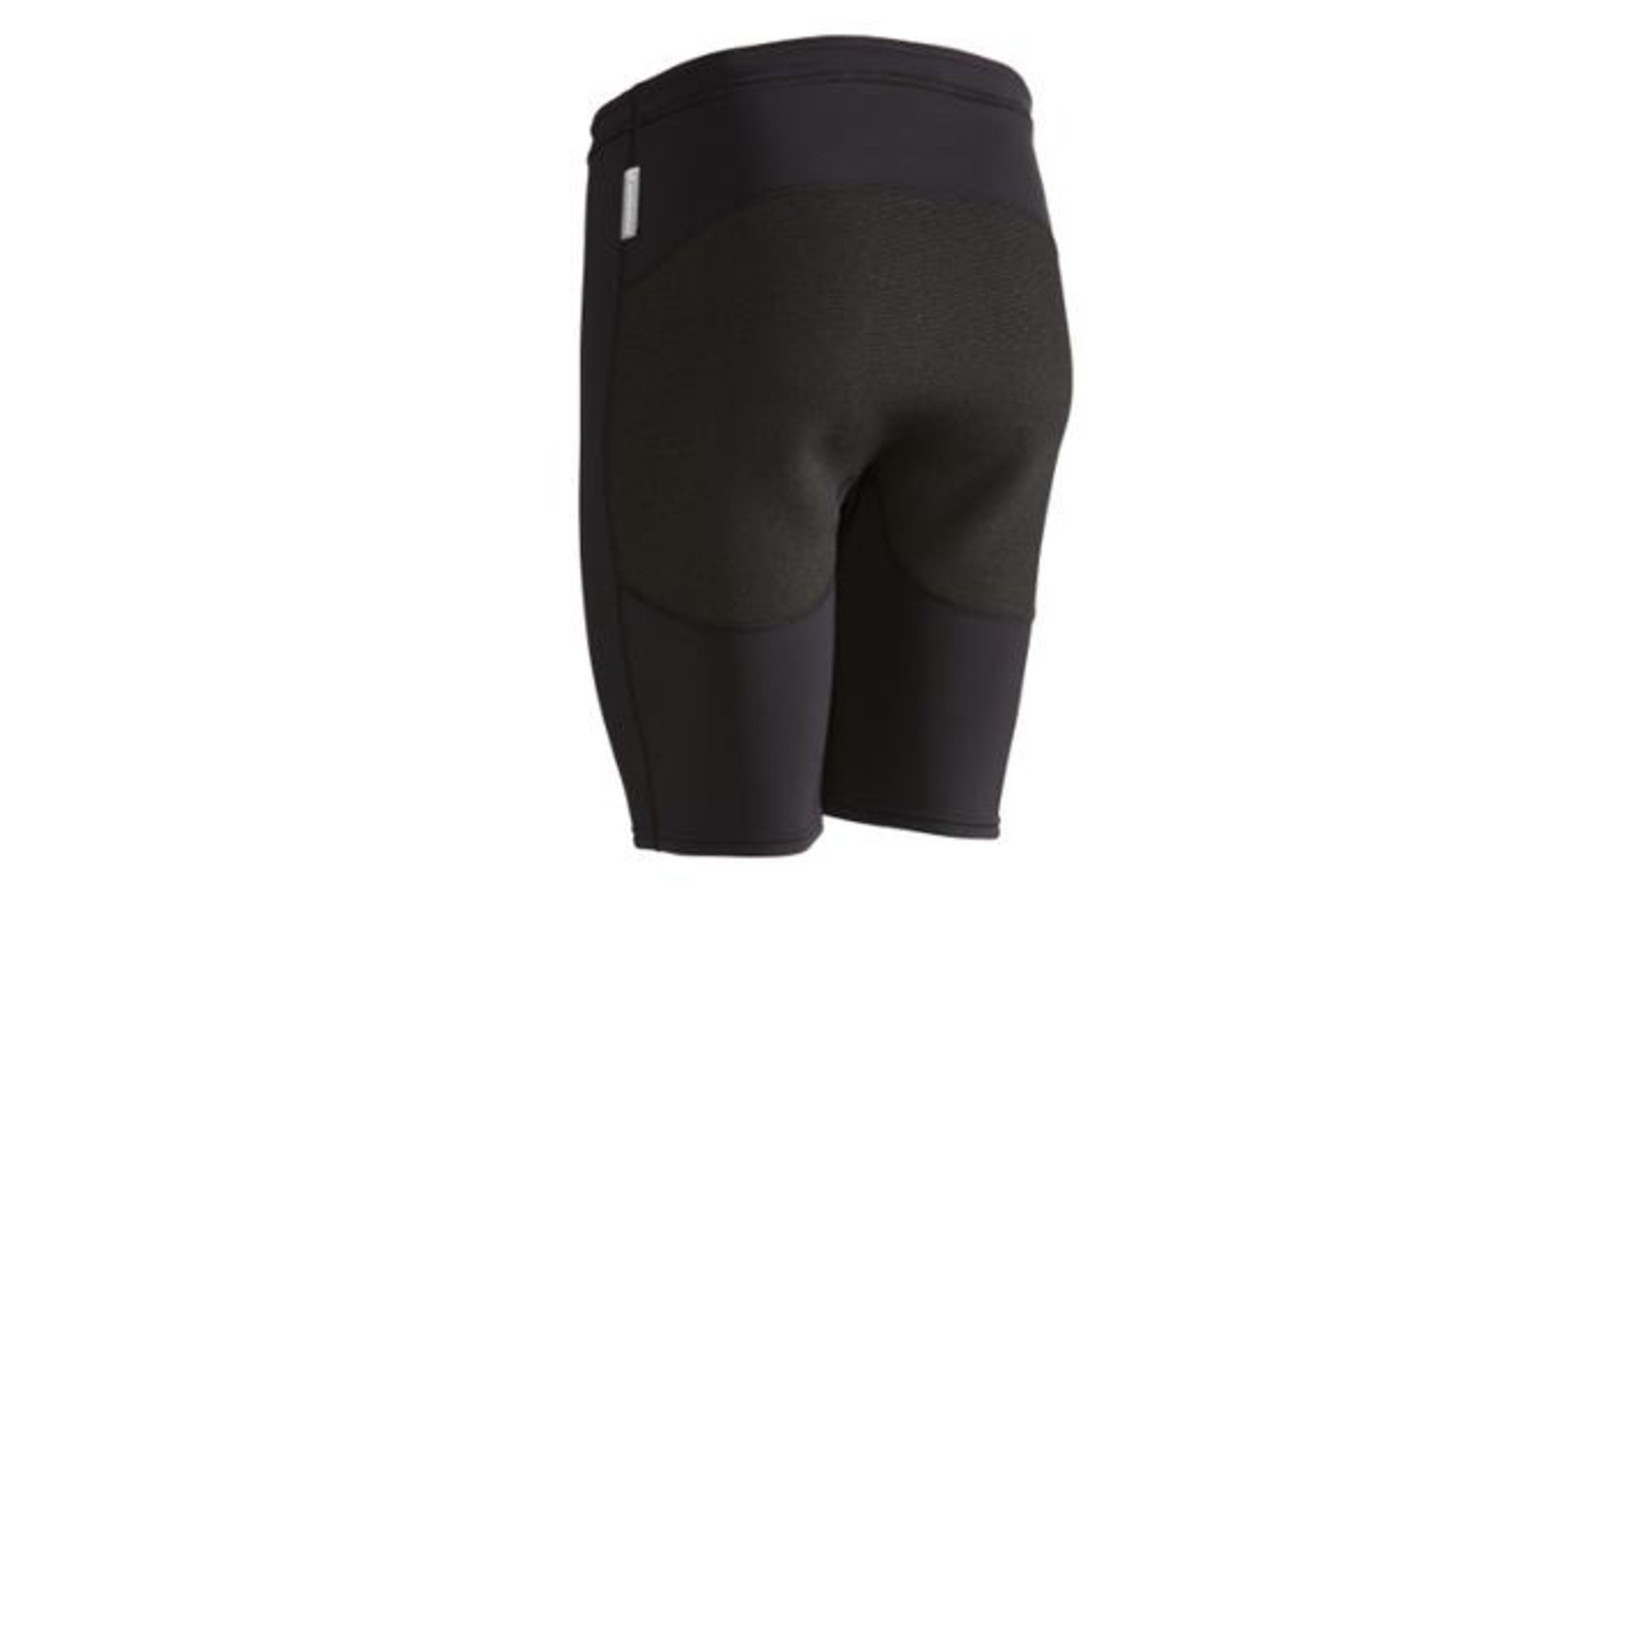 Immersion Research Immersion Research Neoprene Short Liners